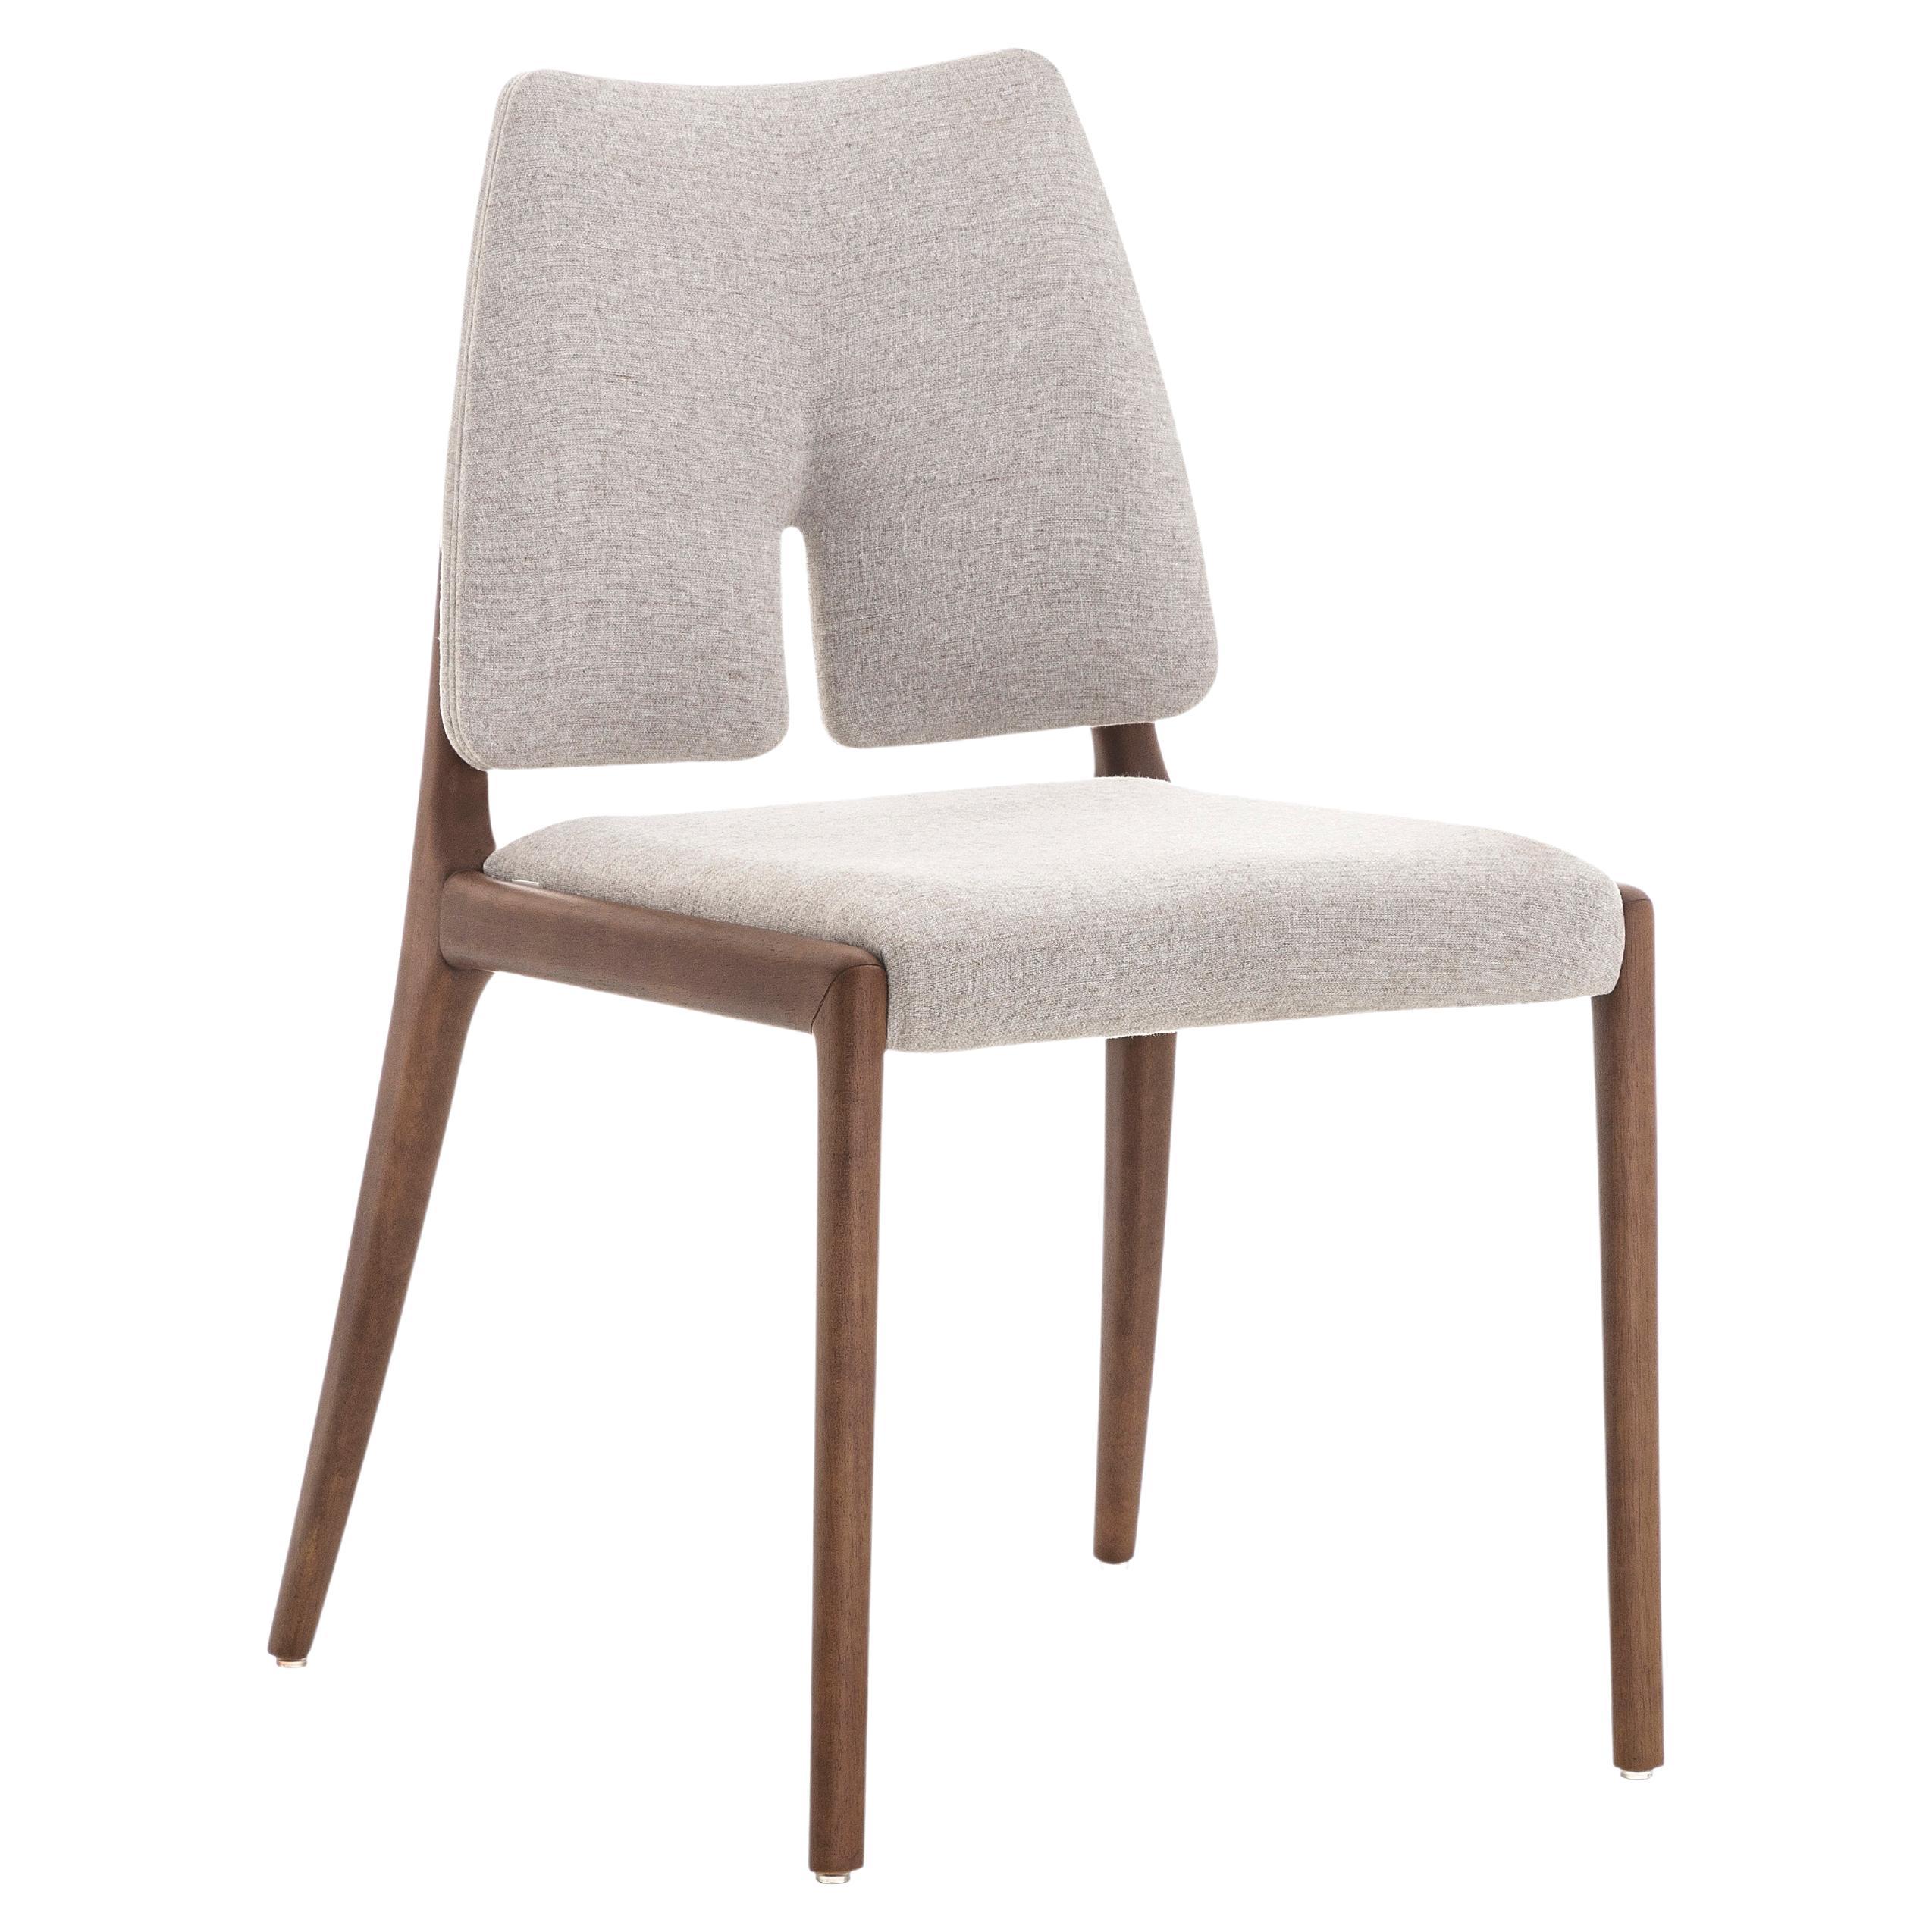 The creative team at Uultis created this dining room chair to embellish that family space with legs that are made of wood in a walnut finish, combining it with a light beige cotton beautiful fabric. It is a chair designed to provide comfort and